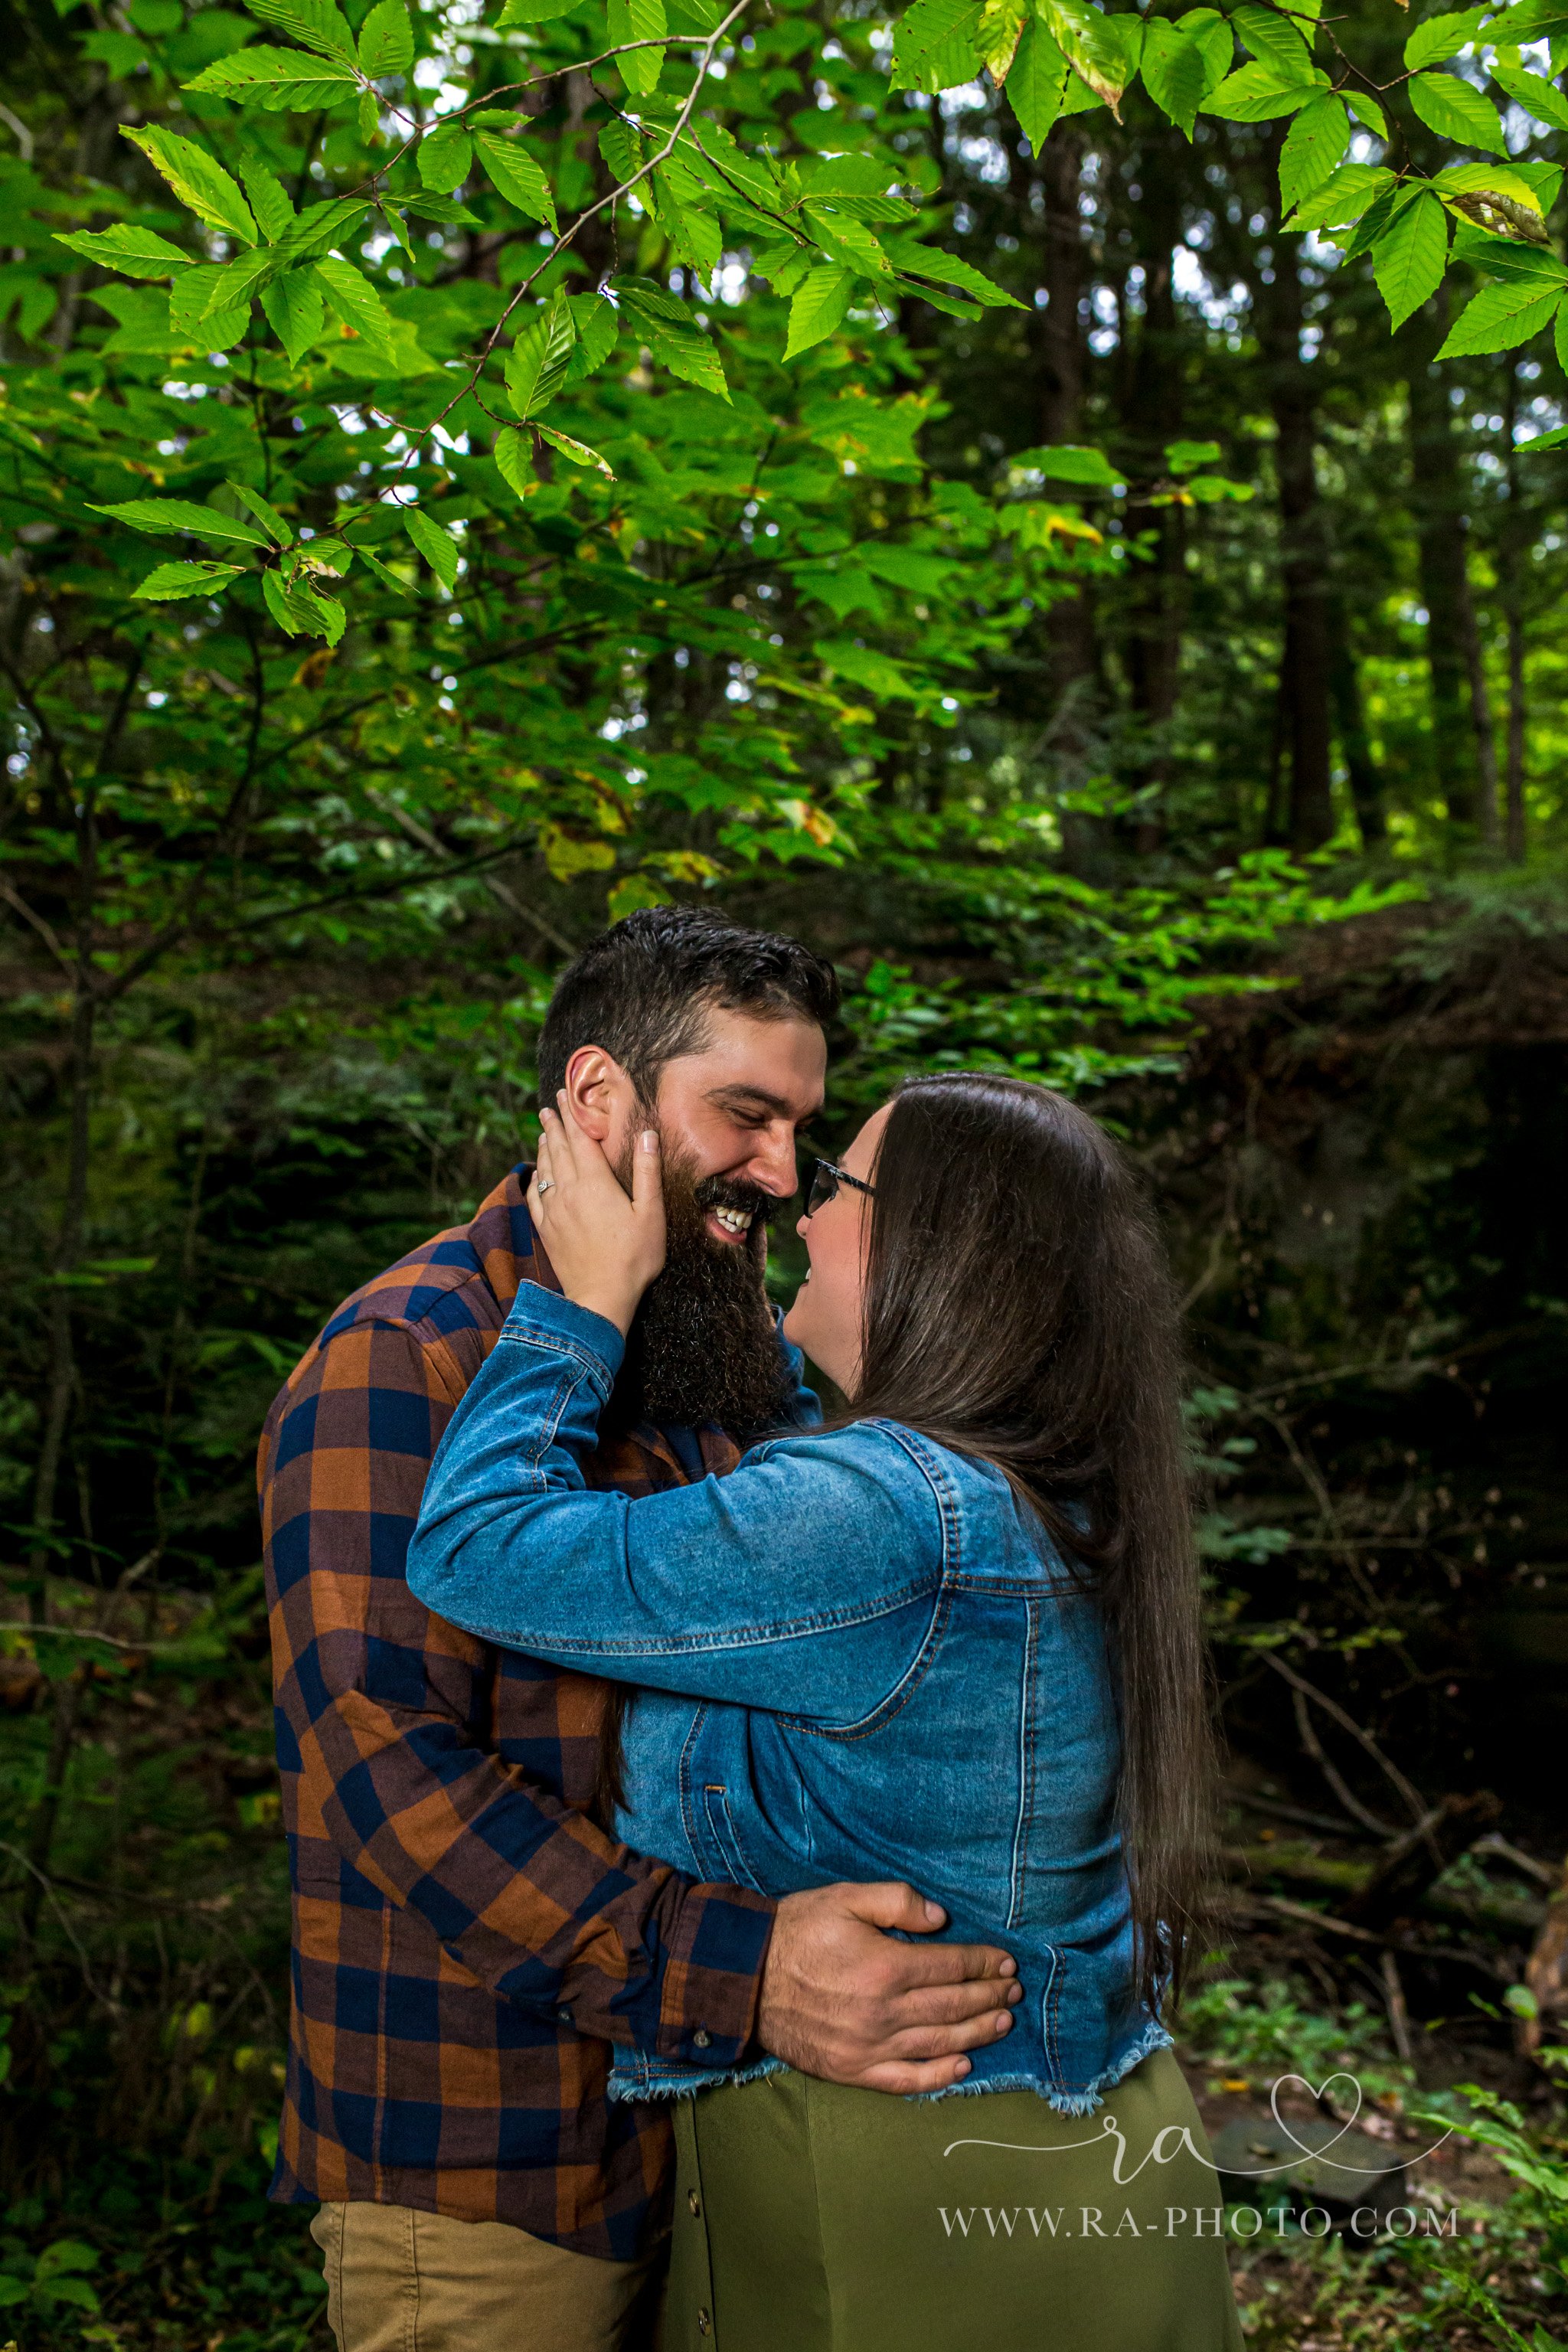 022-MGS-FALLS-CREEK-PA-ENGAGEMENT-PICTURES.jpg